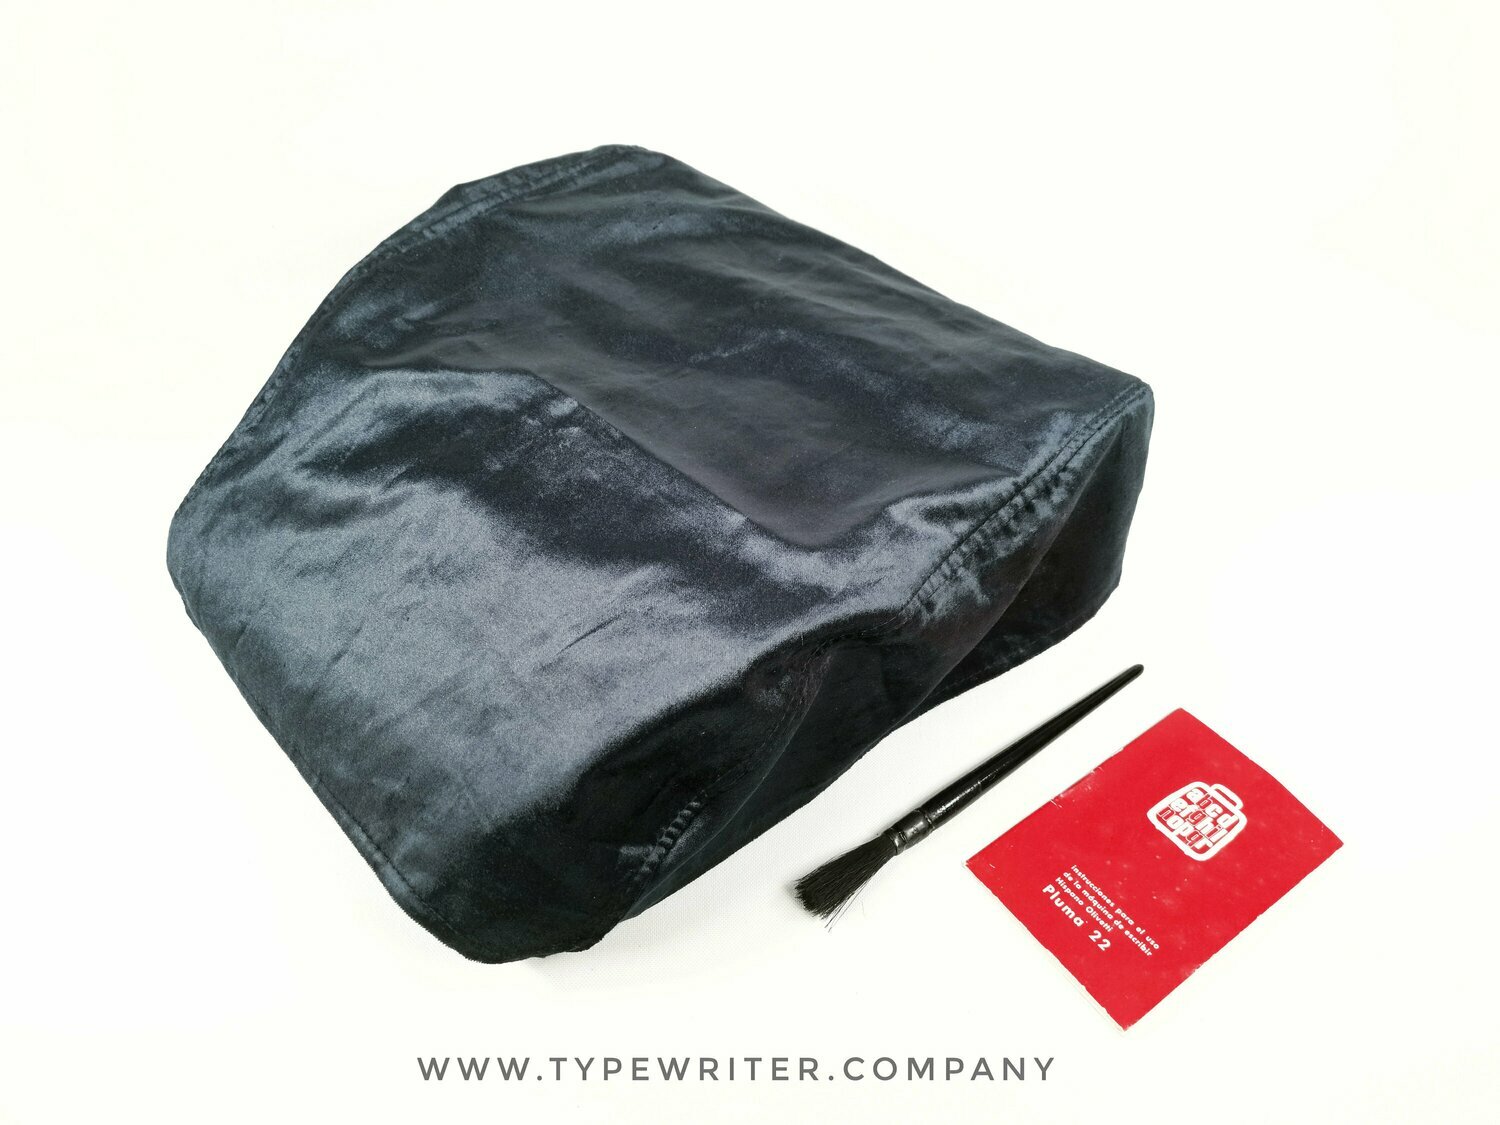 Suede Ink Kit Cover, brush and manual for Pluma 22